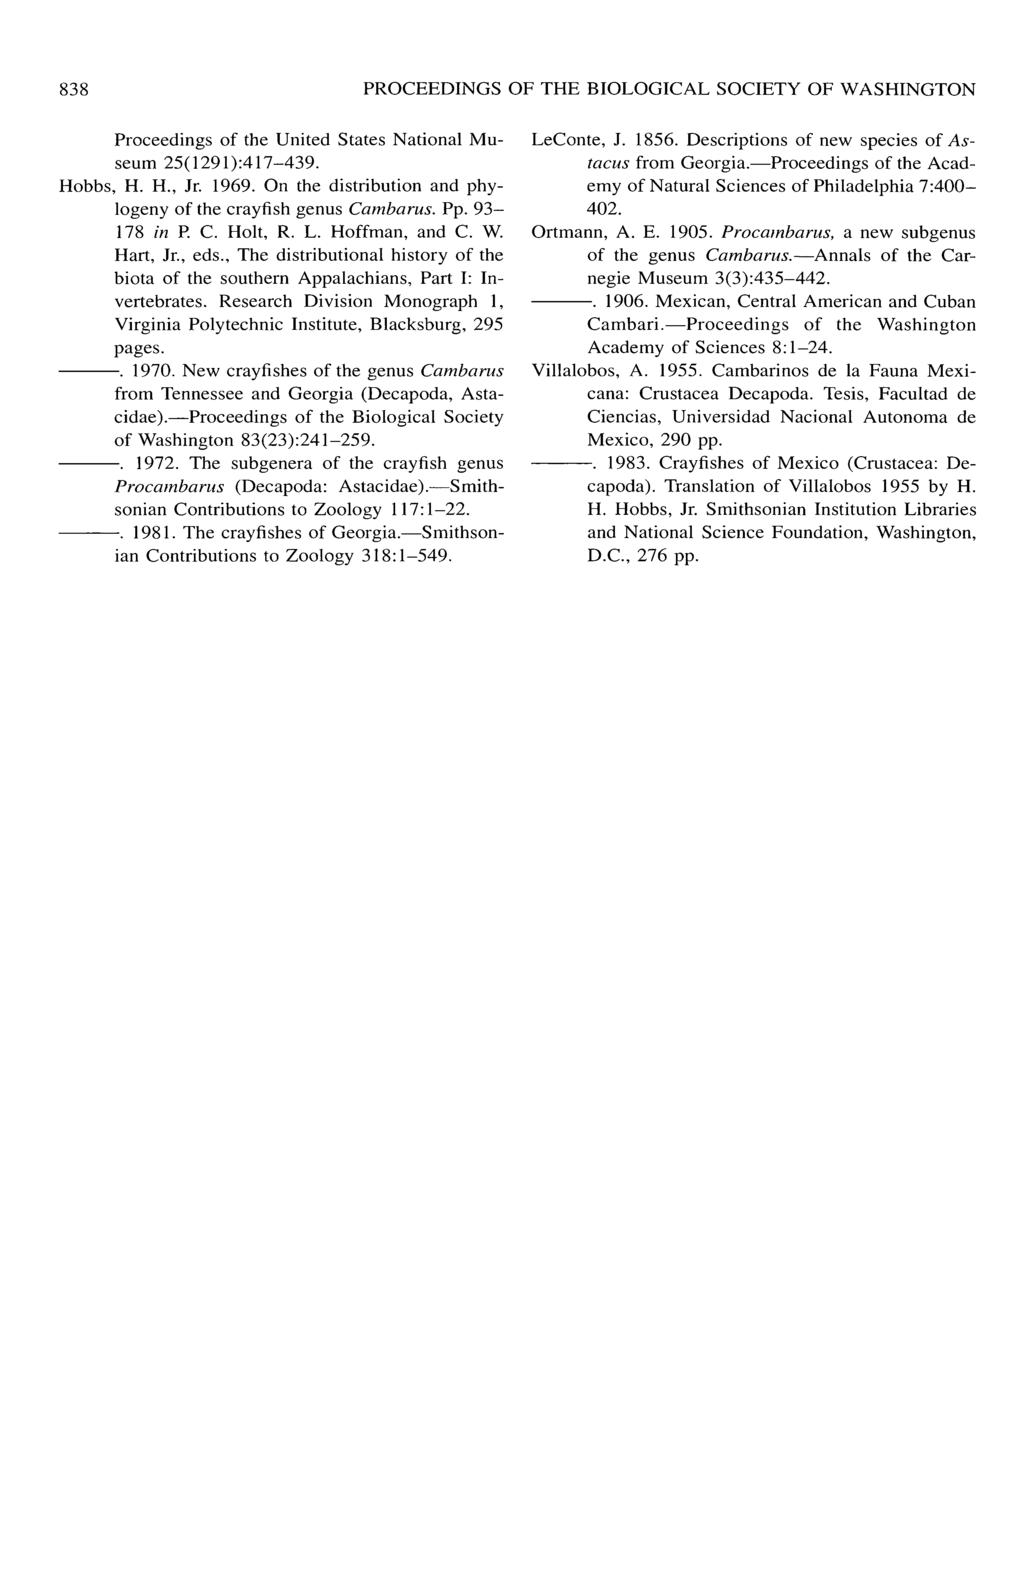 838 PROCEEDINGS OF THE BIOLOGICAL SOCIETY OF WASHINGTON Proceedings of the United States National Museum 25( 1291 ):417-439. Hobbs, H. H., Jr. 1969.